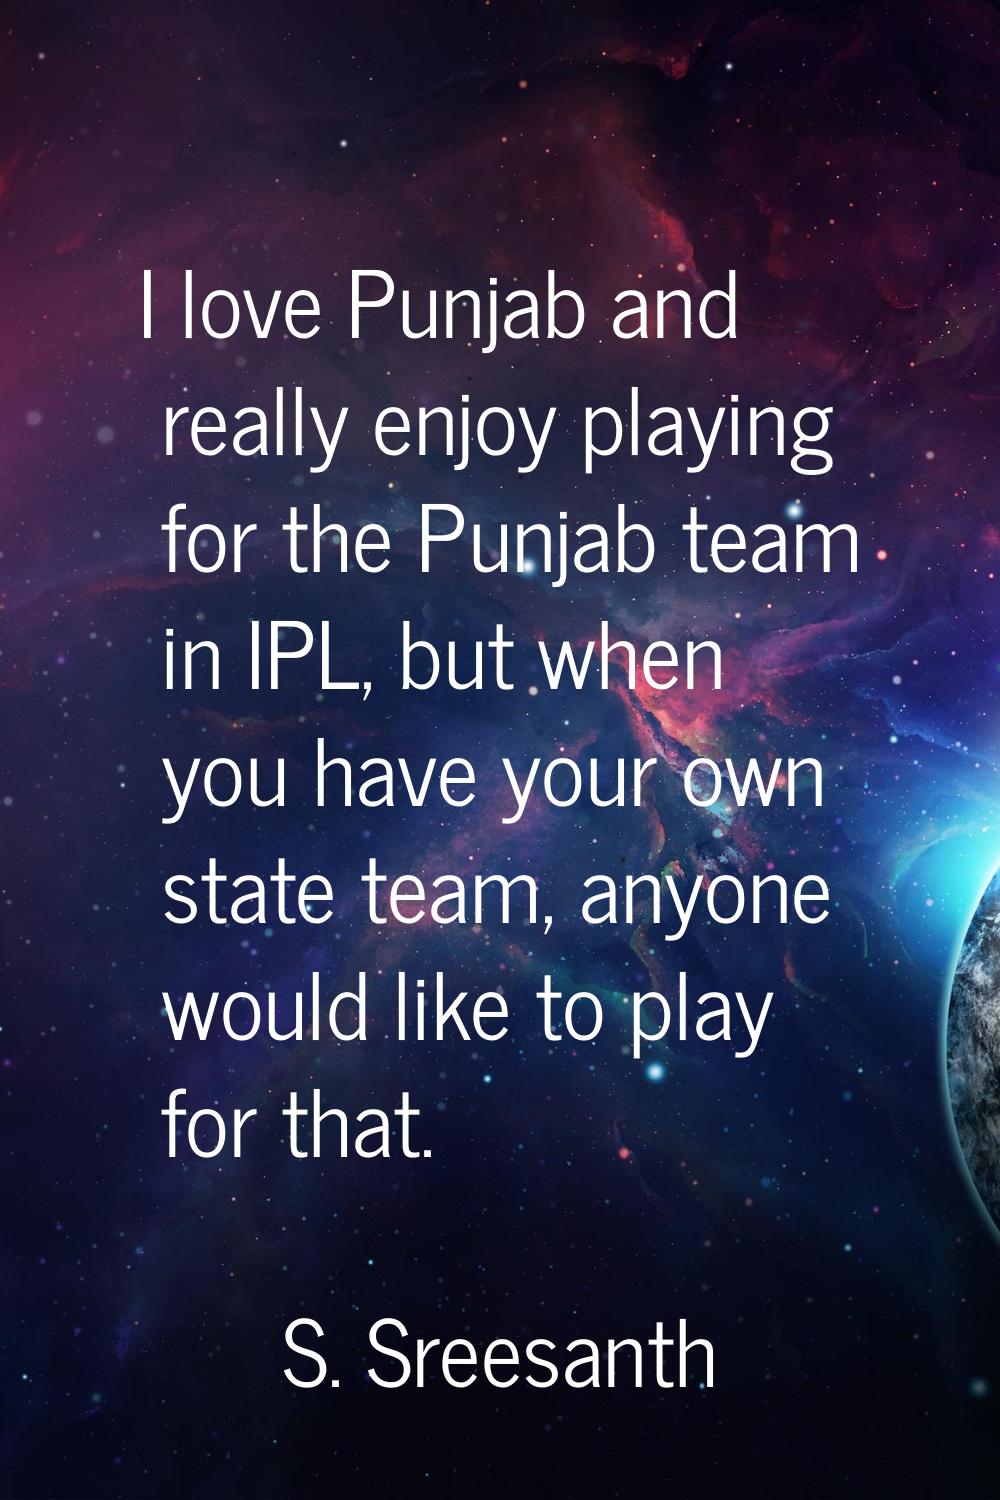 I love Punjab and really enjoy playing for the Punjab team in IPL, but when you have your own state